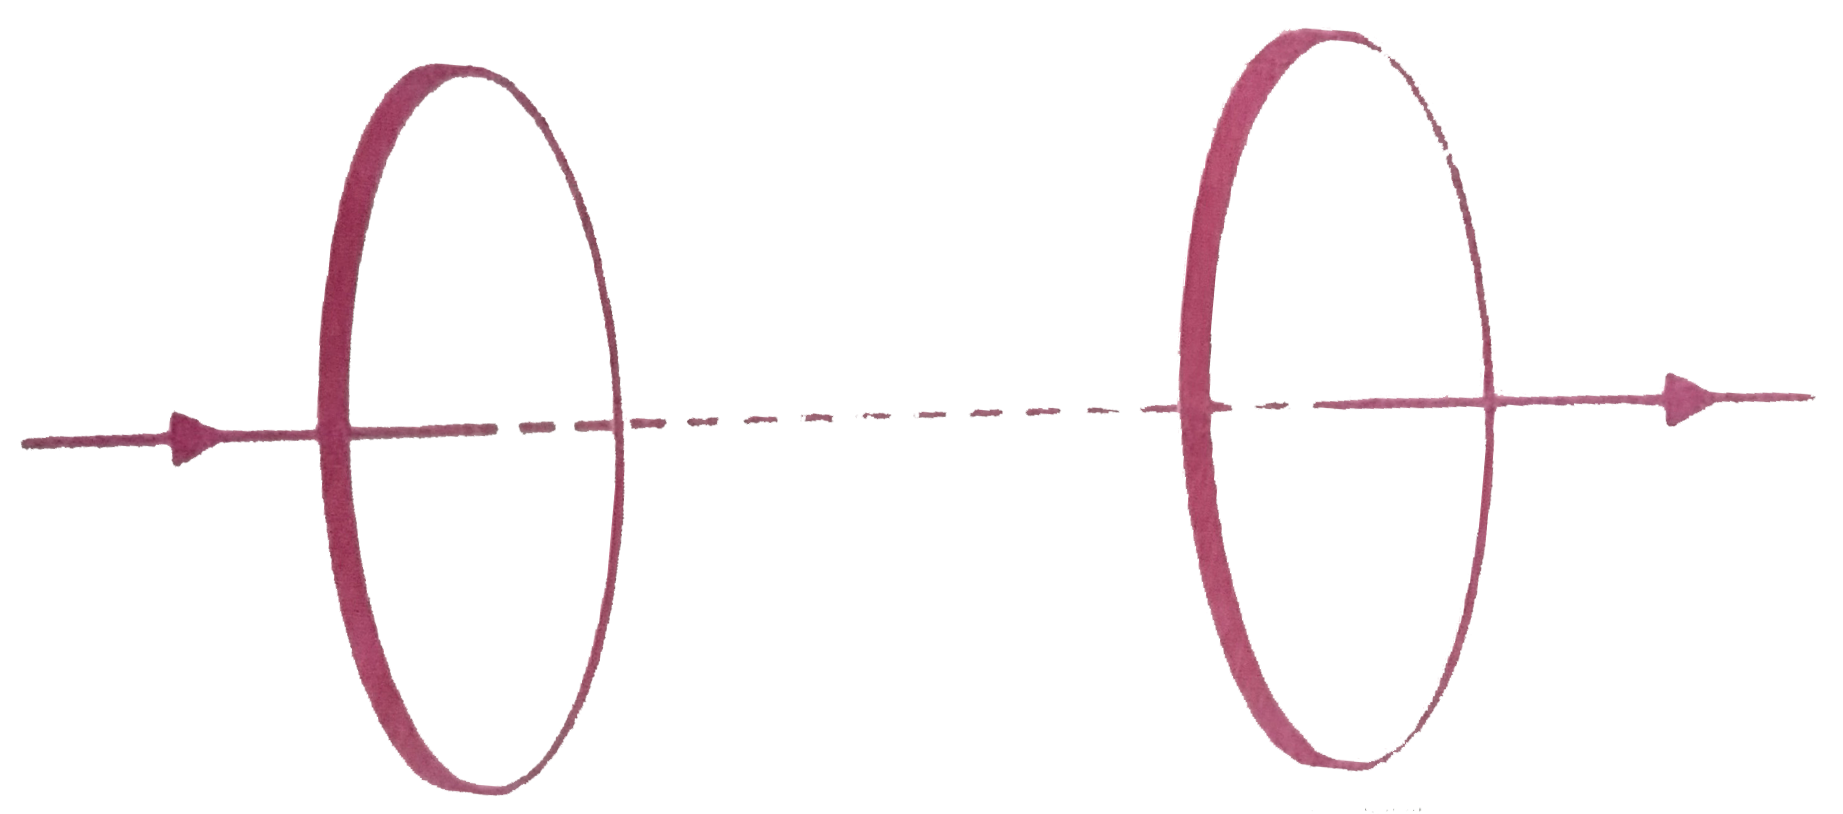 (a) Fig shows a capacitor made of two circular plates each of radius 12cm and separated by 5.0mm. The capacitor is being charged by an external source (not shown  in the figure). The charging current is constant and equal to 0.15A. Use Ampere's law (modified to include displacement current as given in the text) and the symmetryin the problem to calculate magnetic field between the plates at a point (i) on the axis (ii) 6.5 cm from the axis (iii) 15cm from the axis.   (b) At what distance from the axis is the magnetic field due to displacement current greatest? Obtain the maximum value of the field.